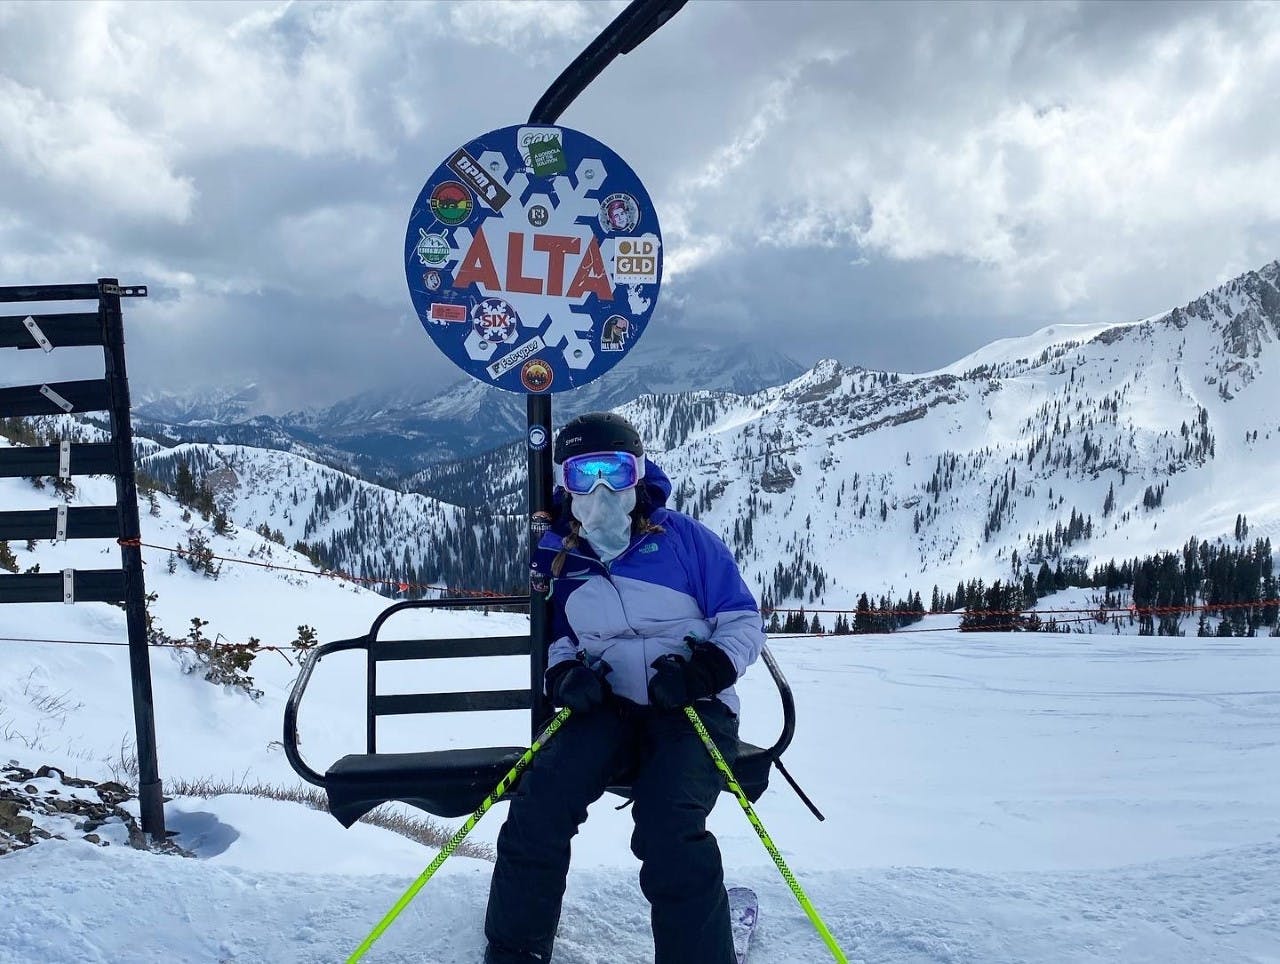 A skier with poles, a helmet, and goggles sits under a sign on a ski run that says "Alta".